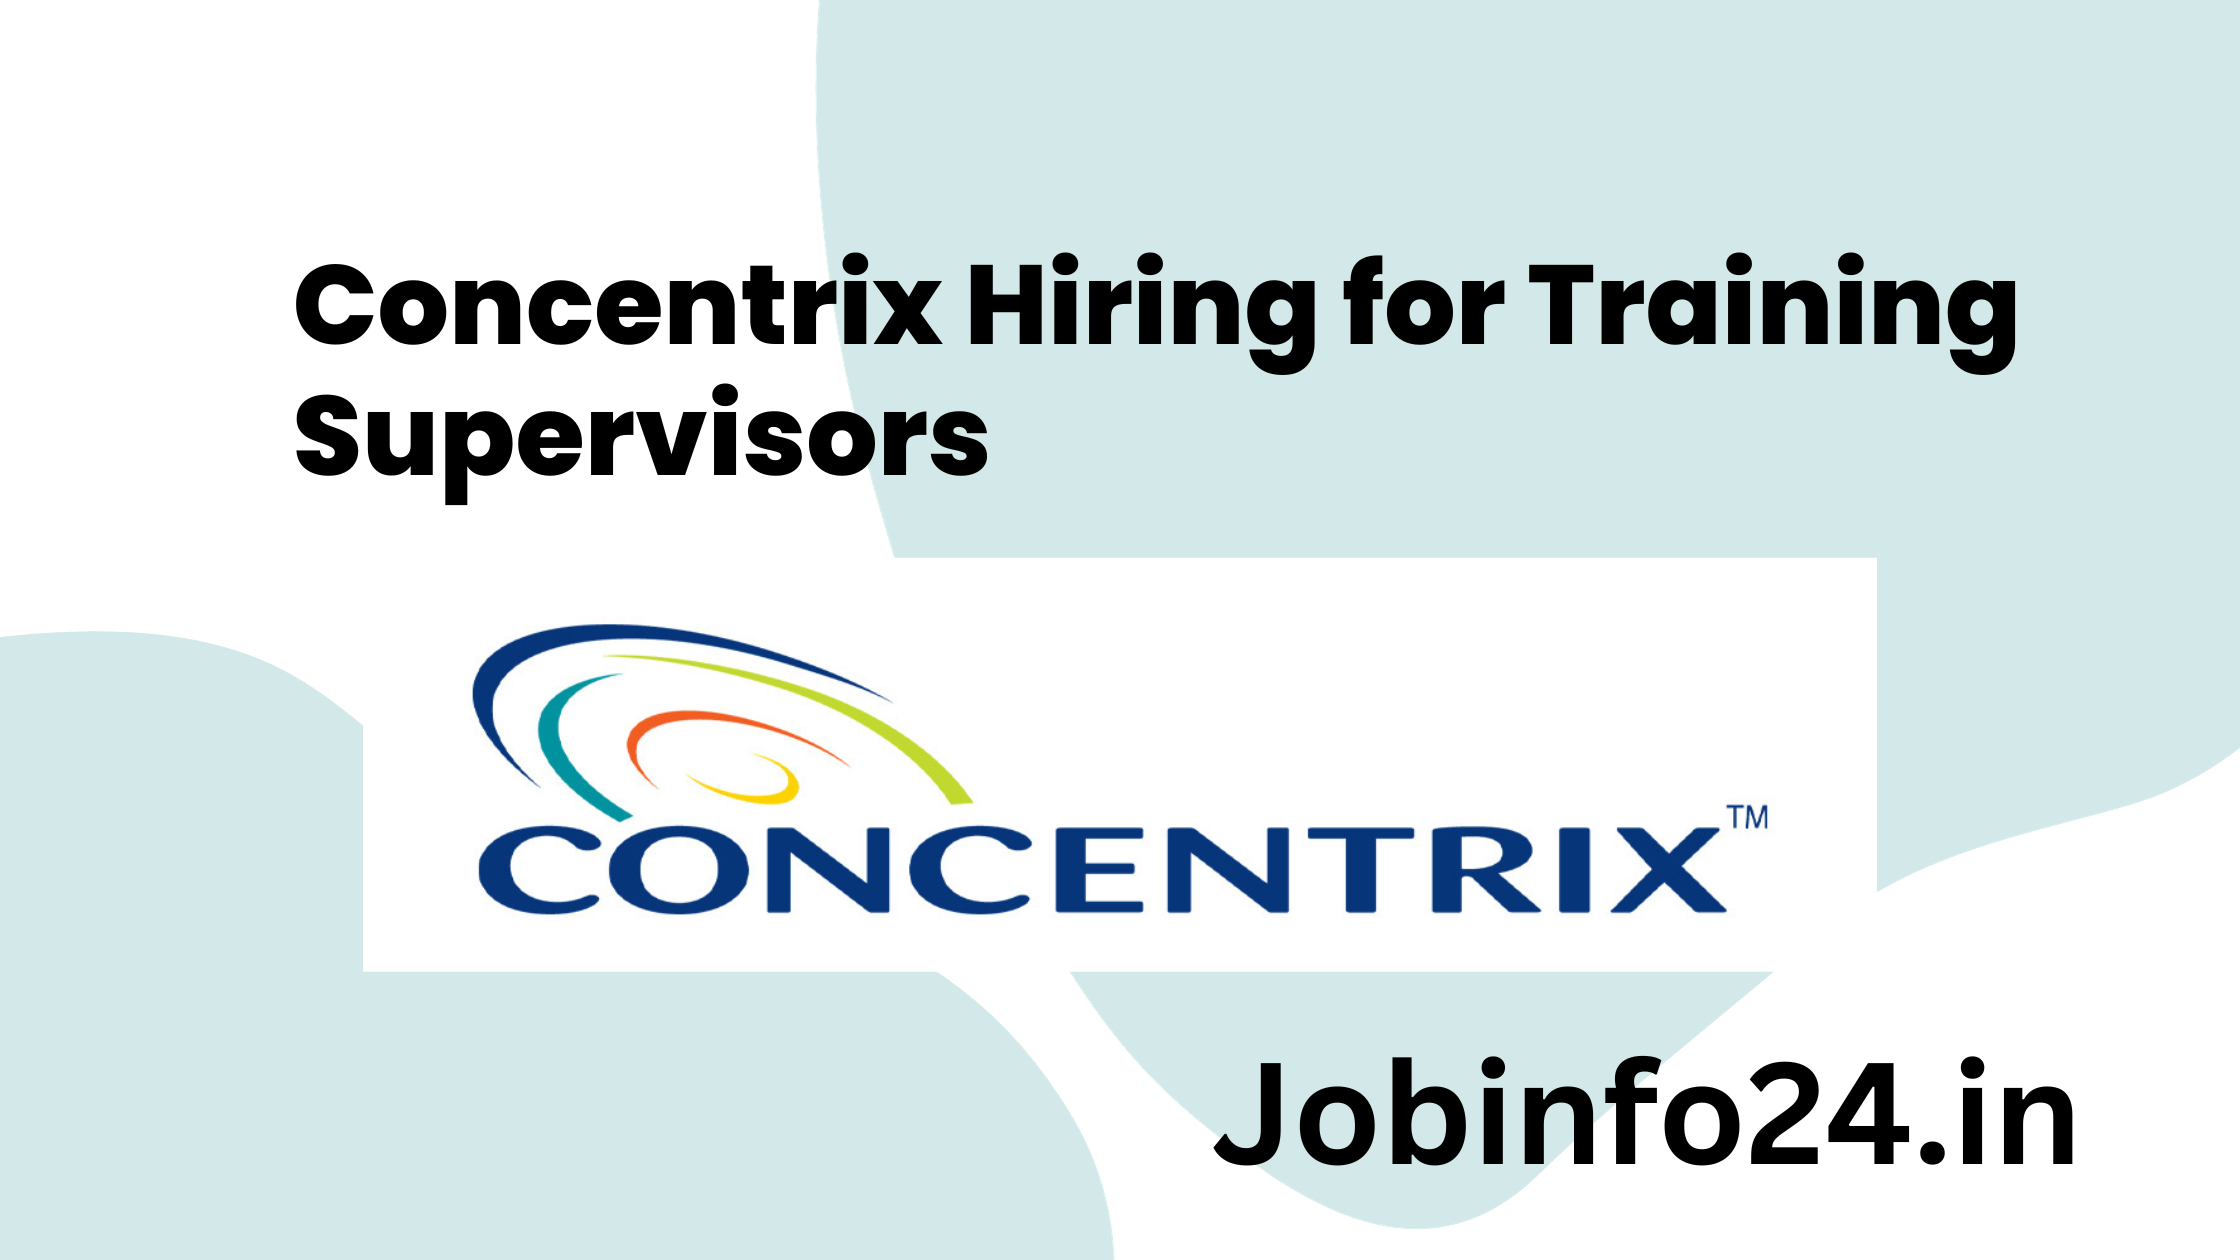 Concentrix Hiring for Training Supervisors